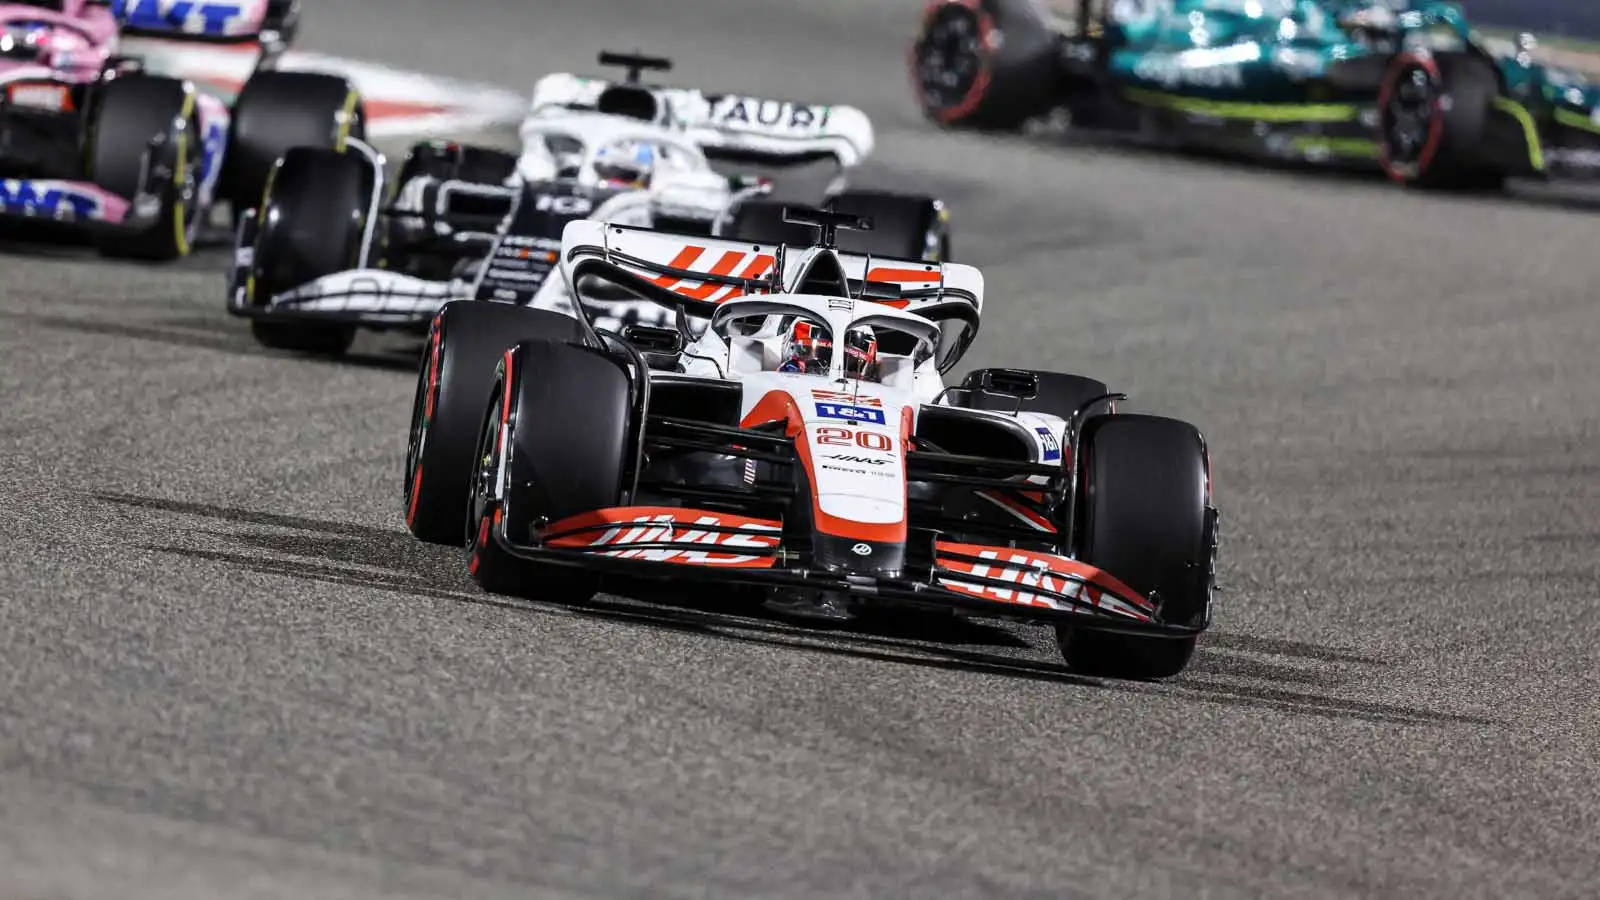 Kevin Magnussen ahead of Pierre Gasly. Bahrain March 2022.